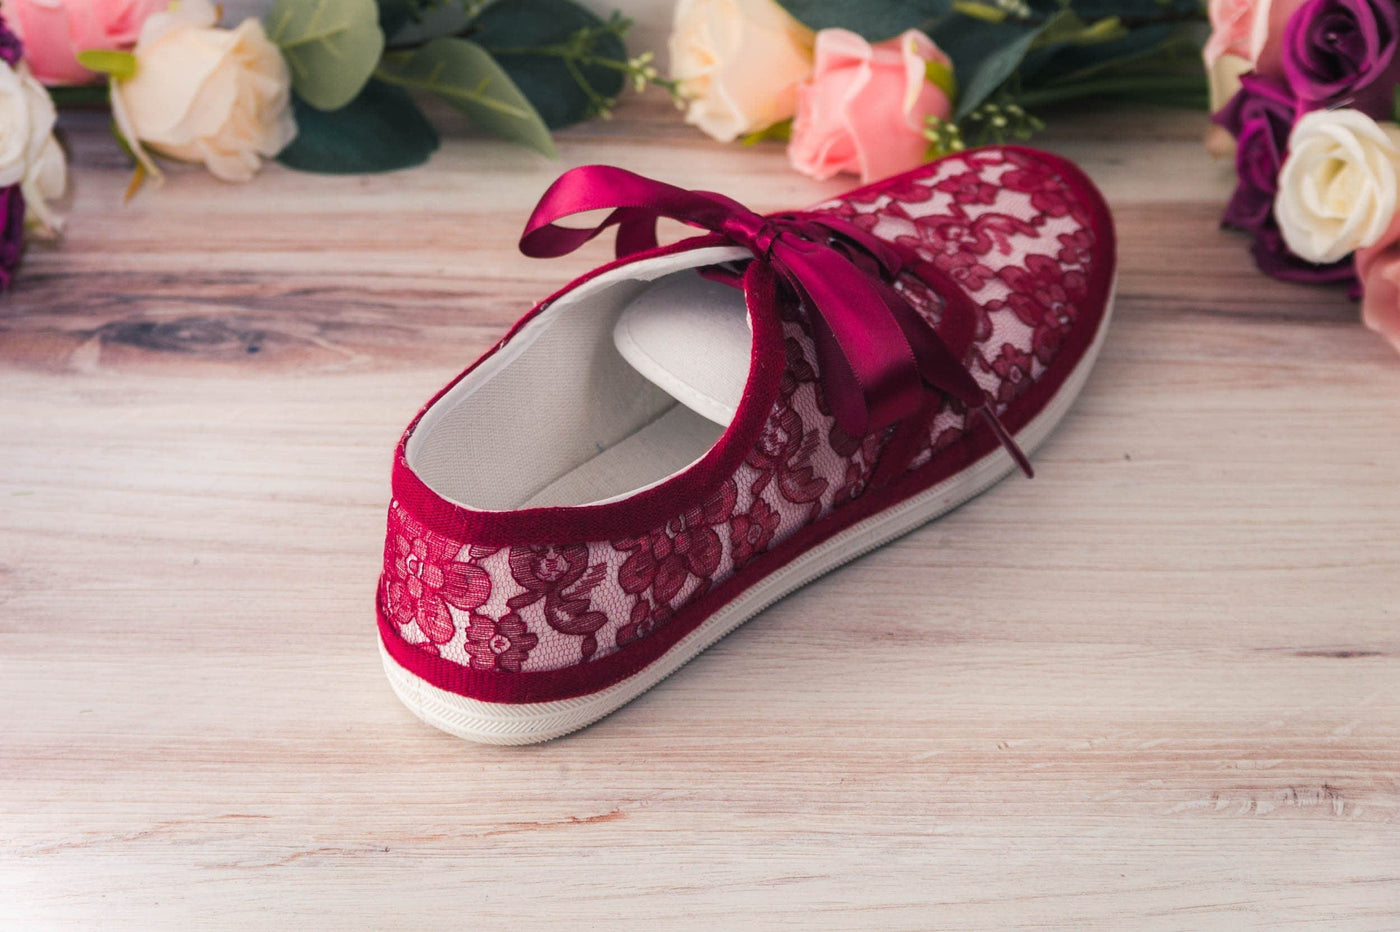 Burgundy Lace Over White Sneakers by Princess Pumps